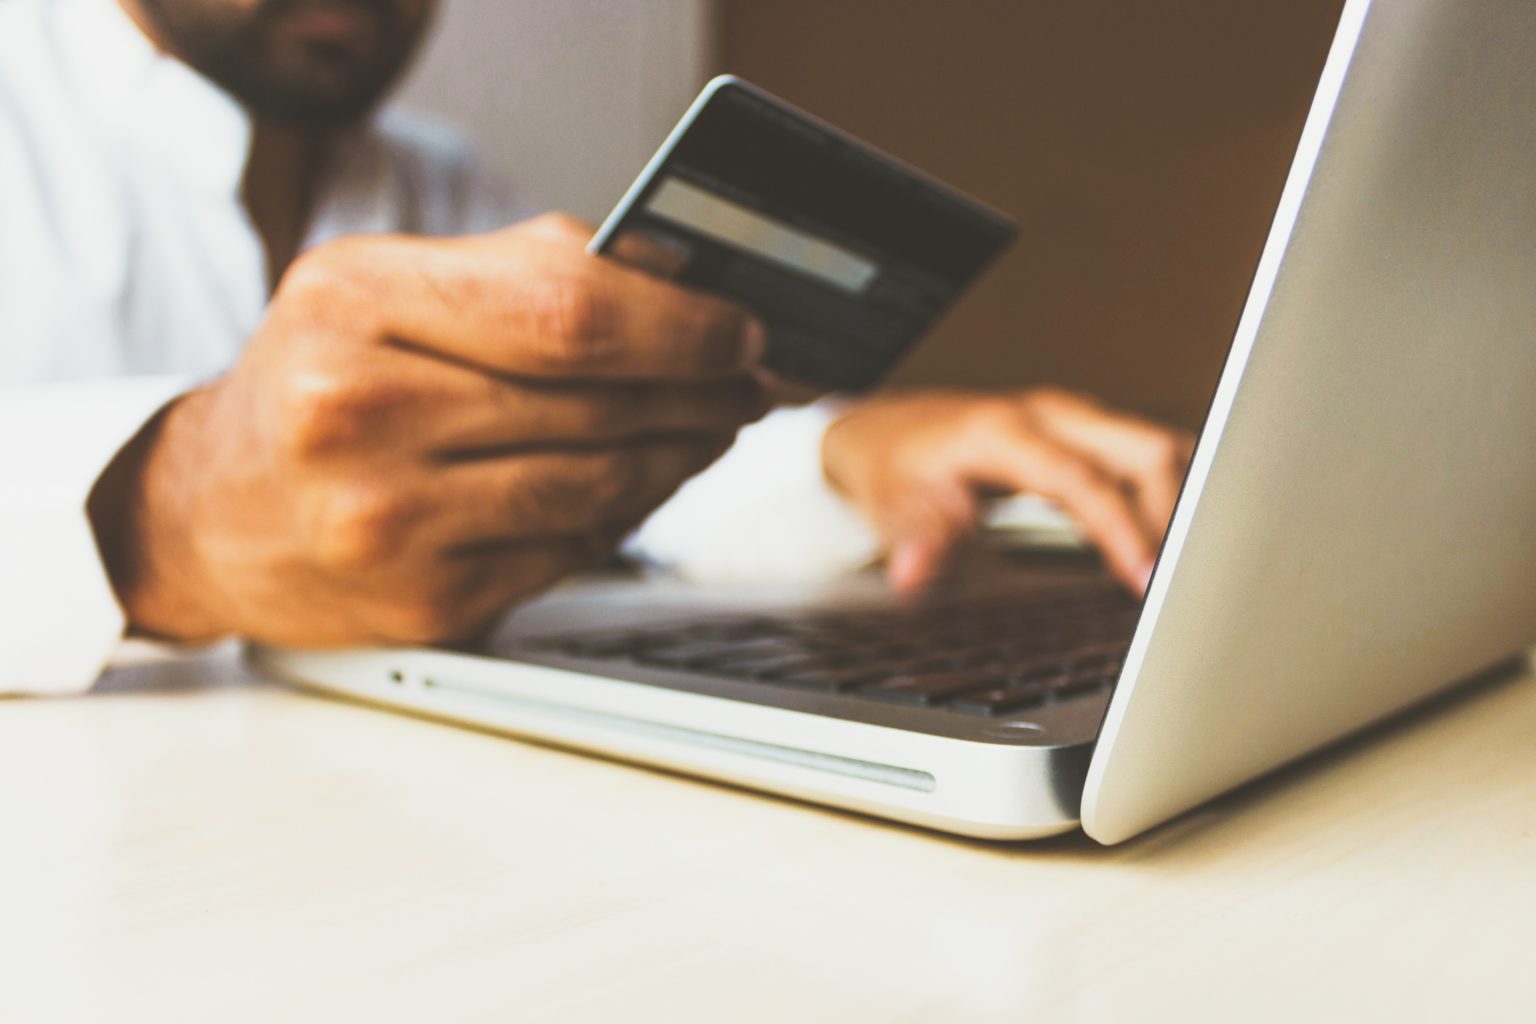 A person holding a payment card in front of a laptop performing an e-commerce transaction